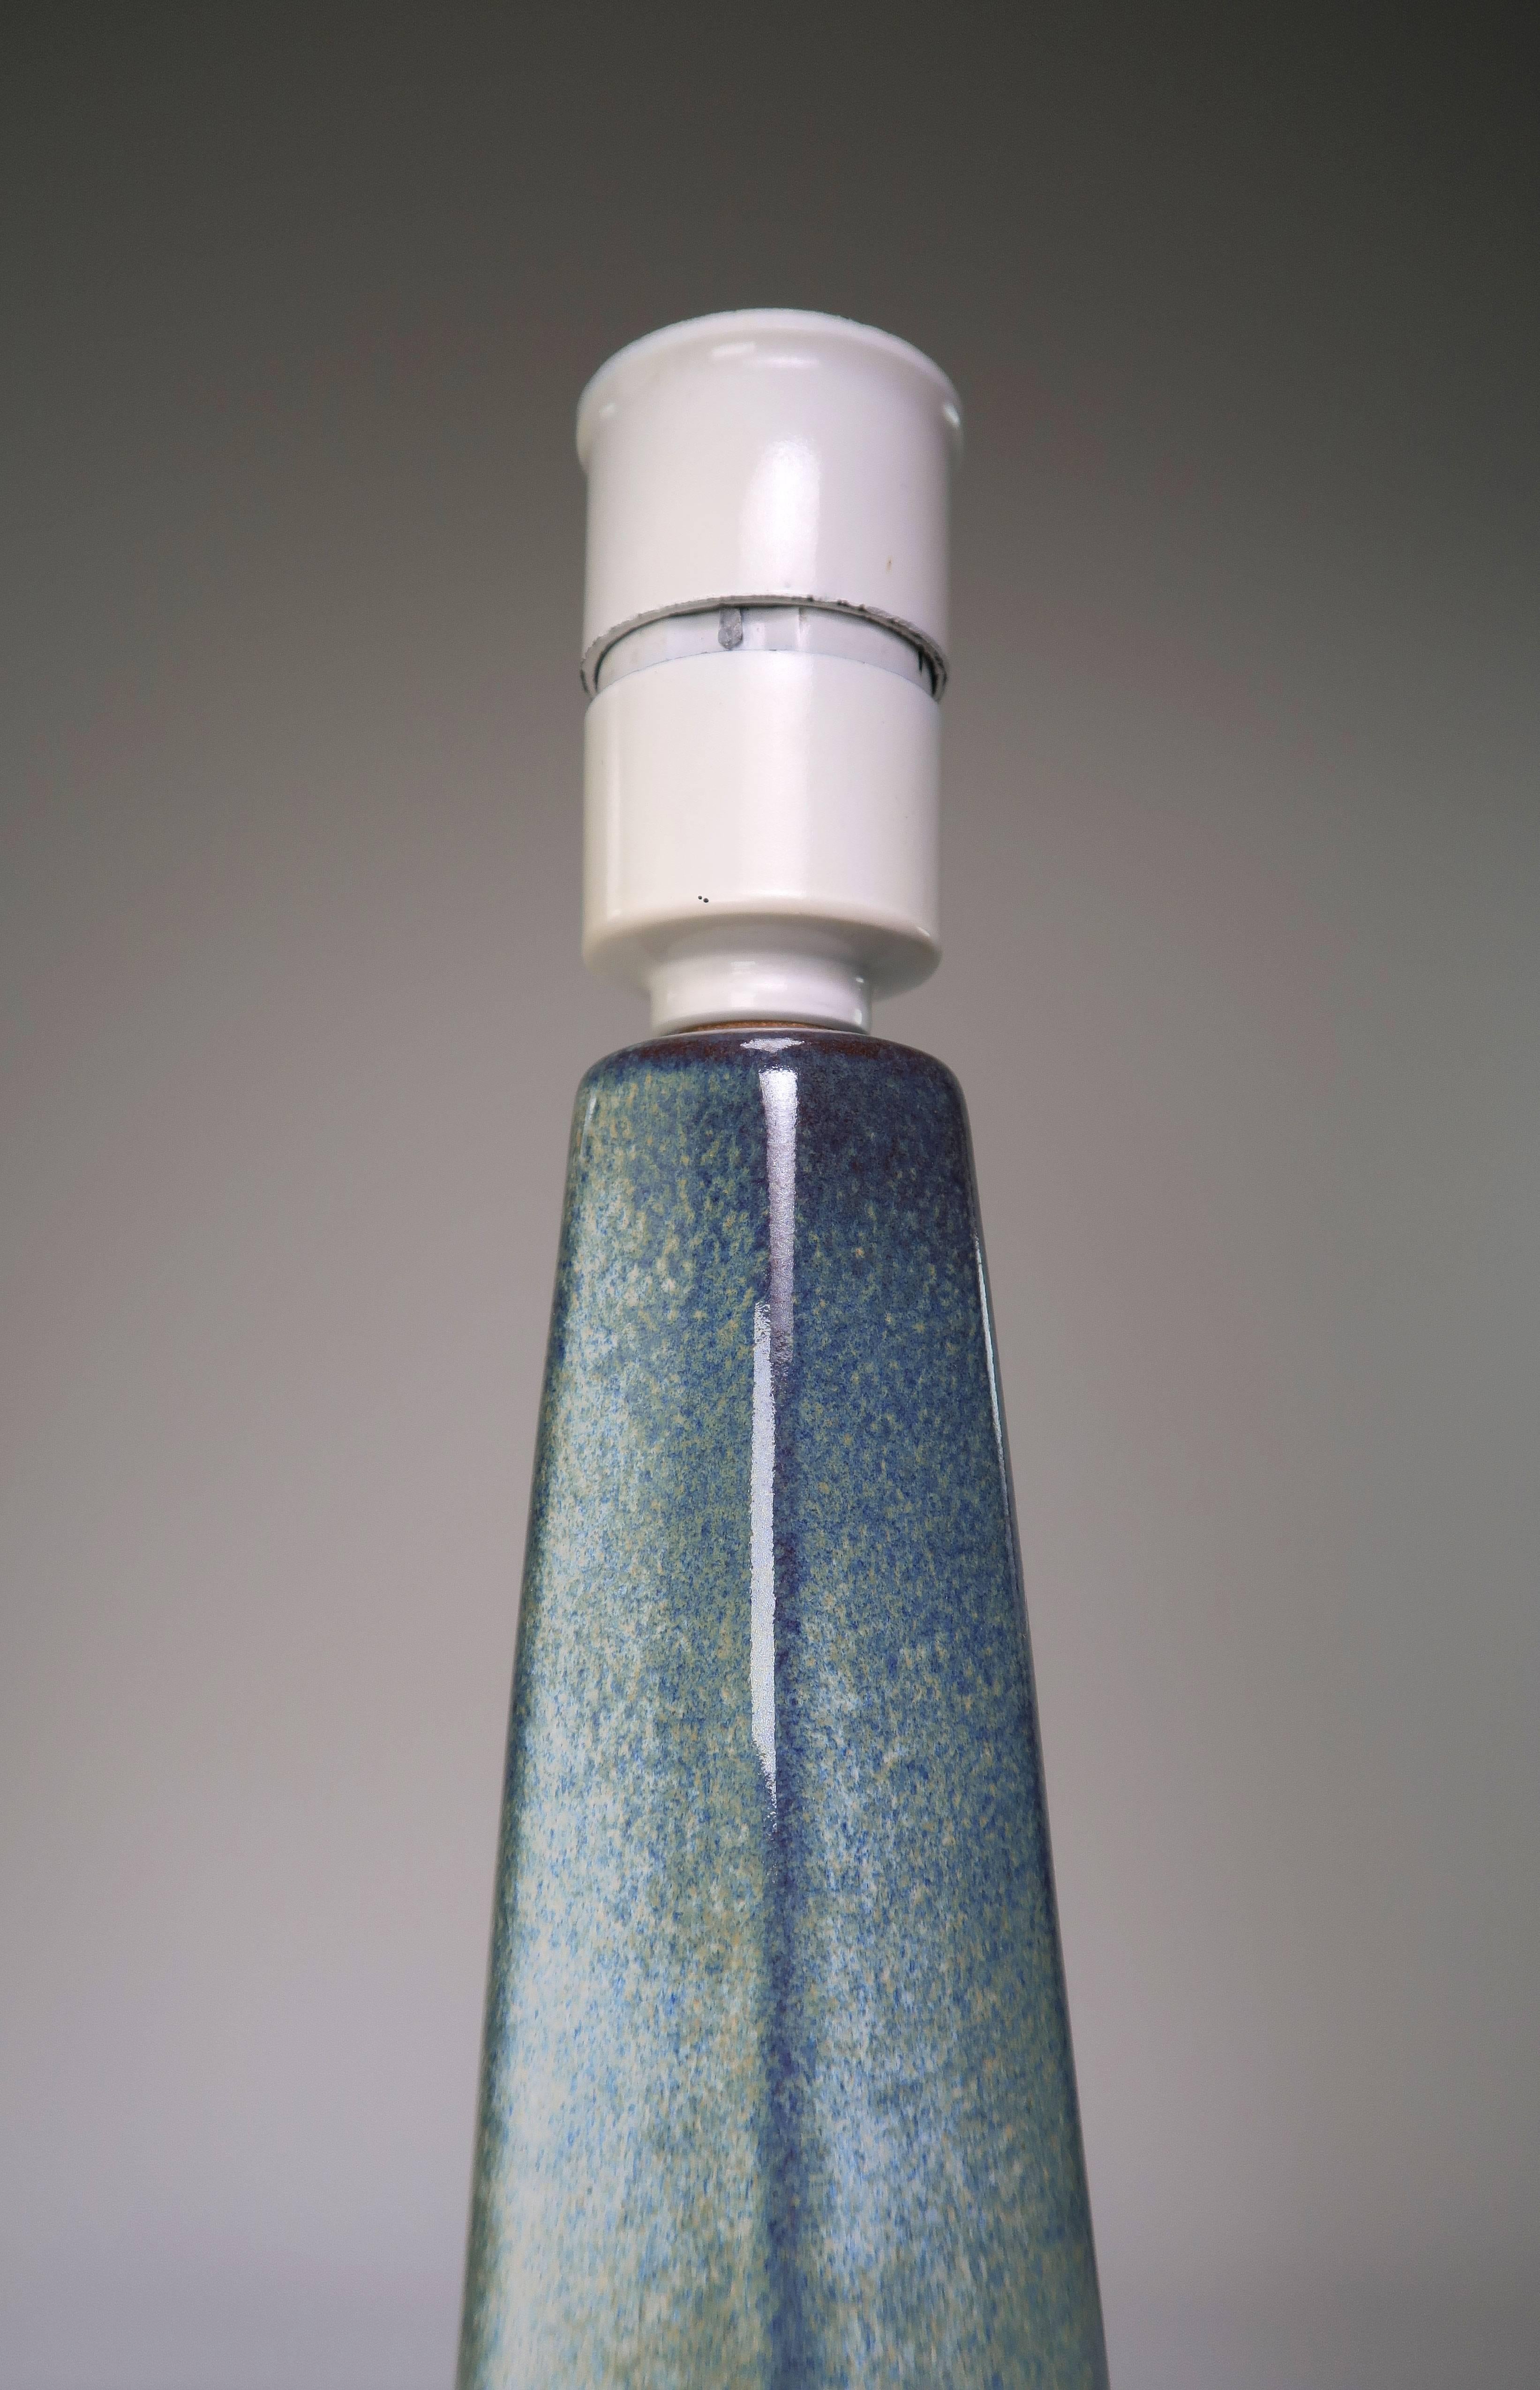 Tall Danish Mid-Century Modern handmade stoneware table lamp by designer Einar Johansen for Danish Soholm Pottery. Manufactured on the island of Bornholm in the 1960s. Royal blue, aqua blue and light green glaze mixed together creating the illusion